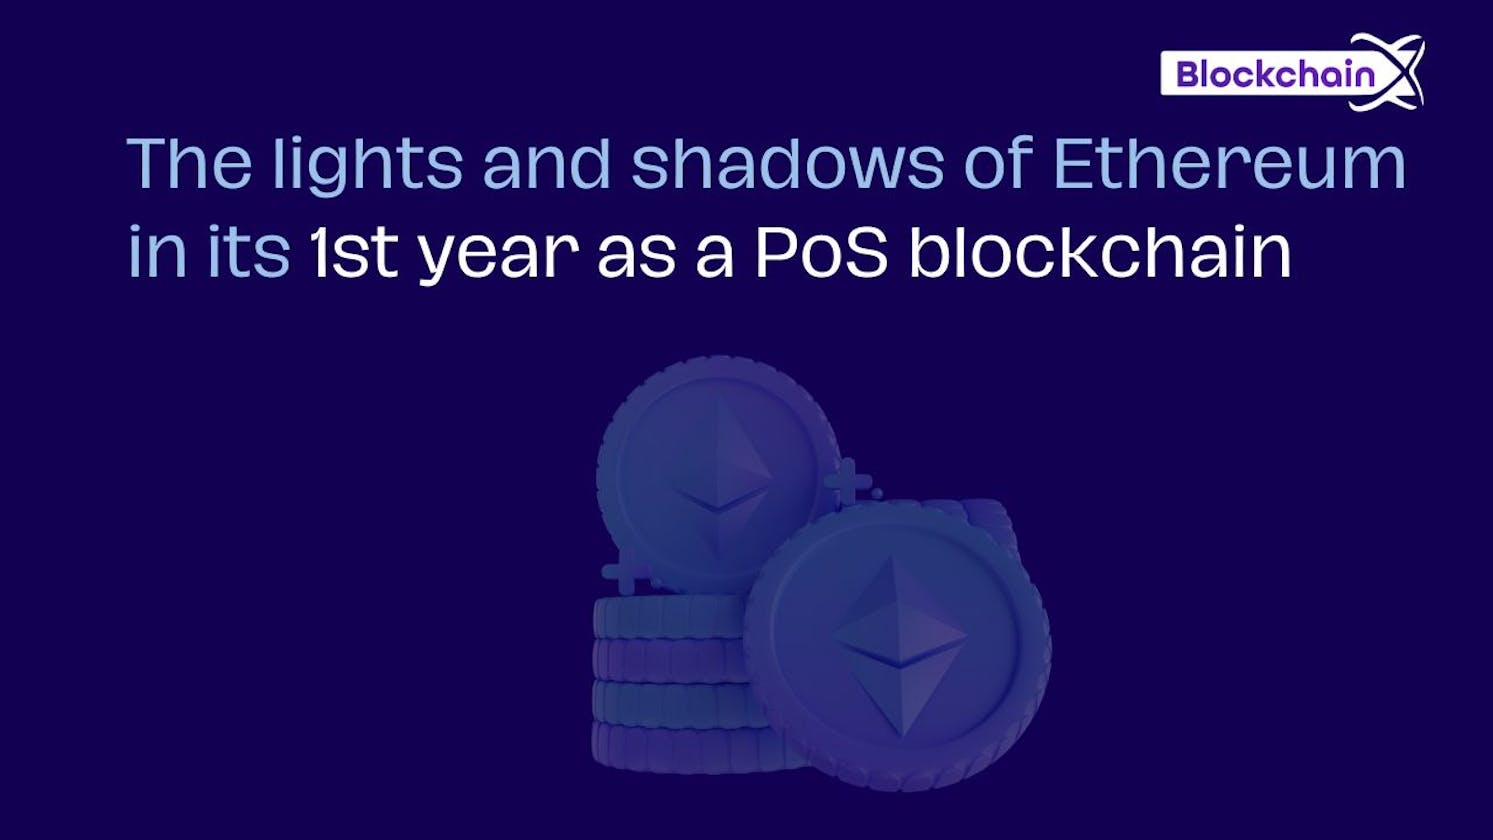 The lights and shadows of Ethereum(ERC) in its 1st year as a PoS blockchain